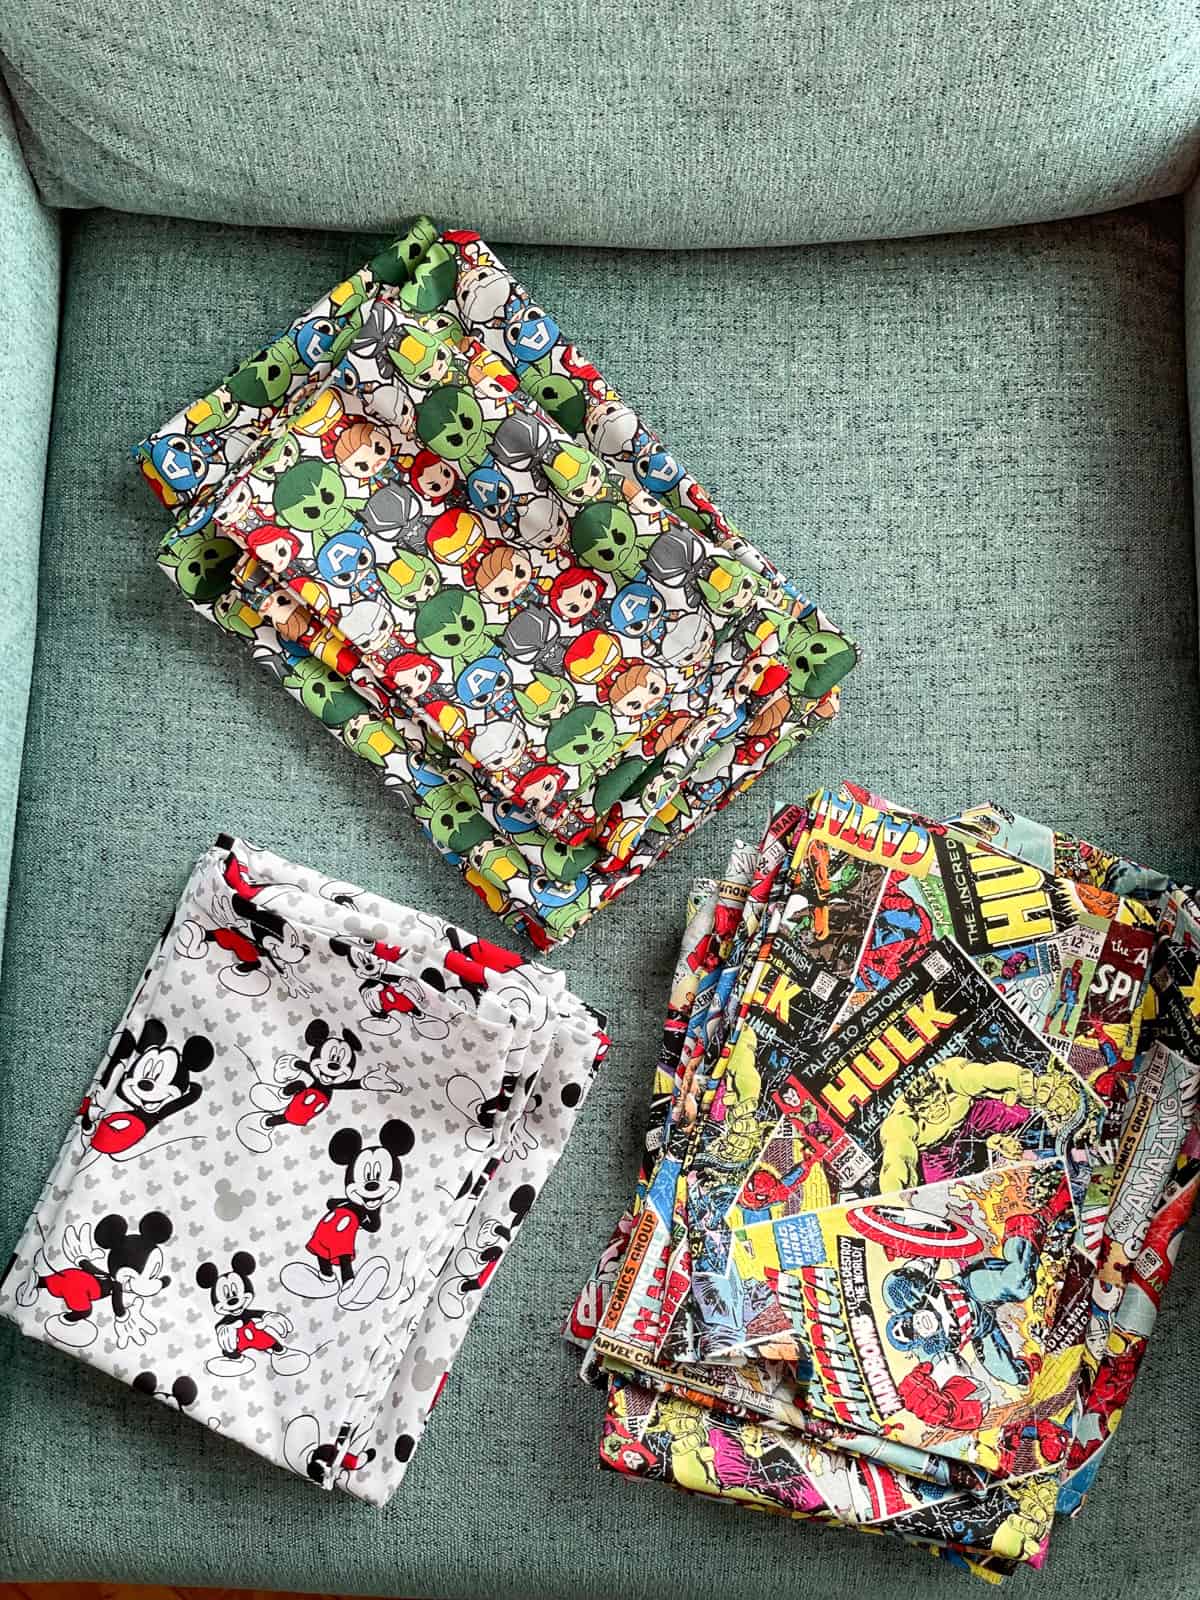 disney and marvel fabric on a teal chair.